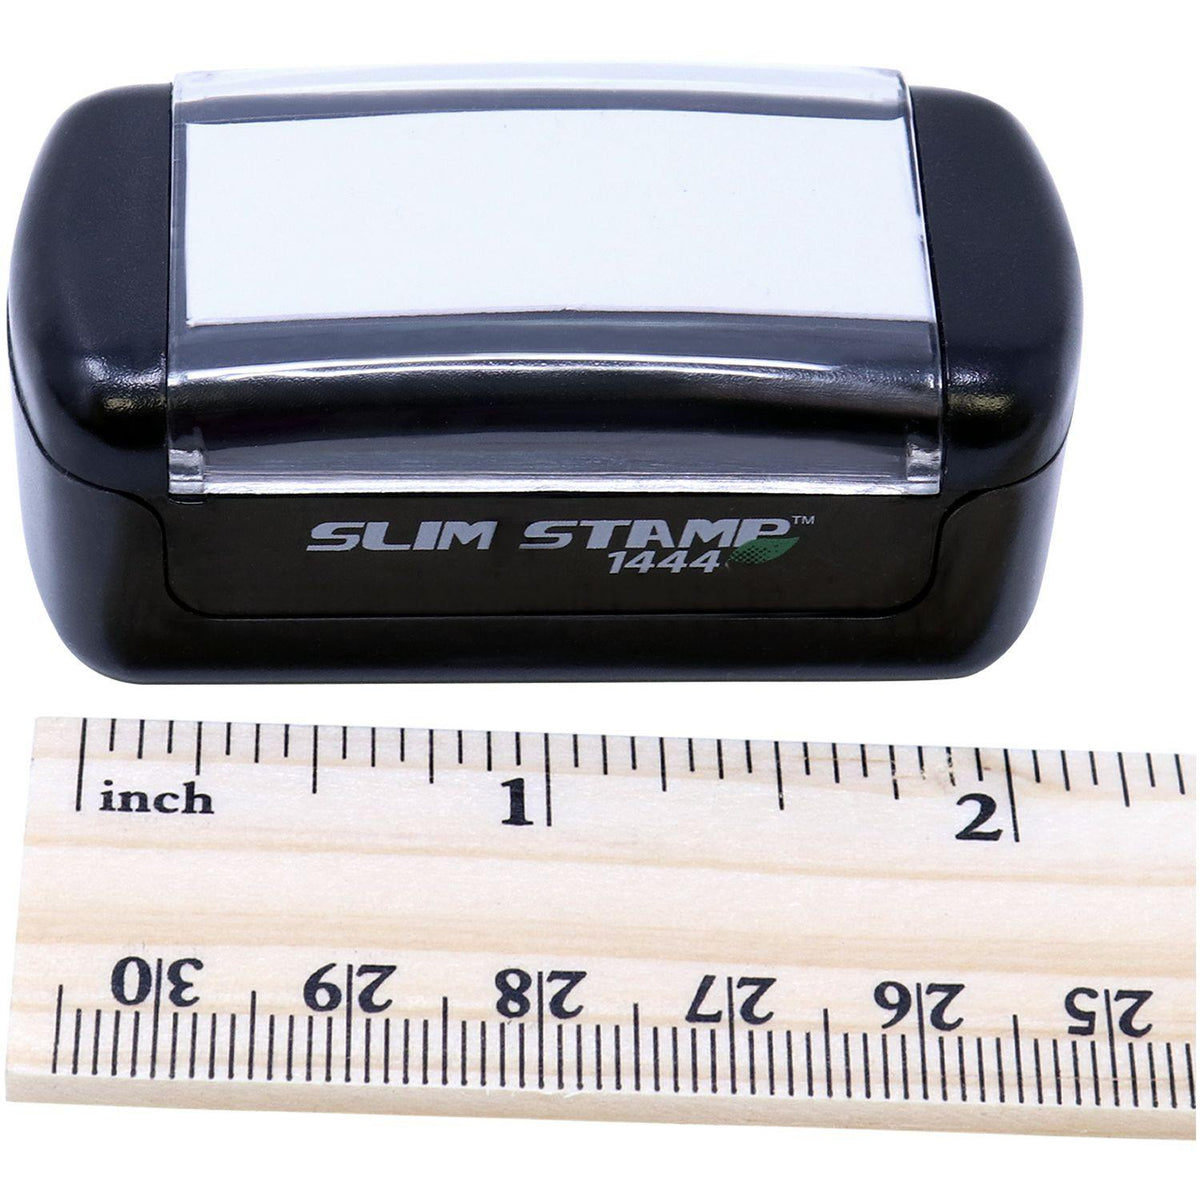 Measurement Slim Pre-Inked Posted with Date Box Stamp with Ruler